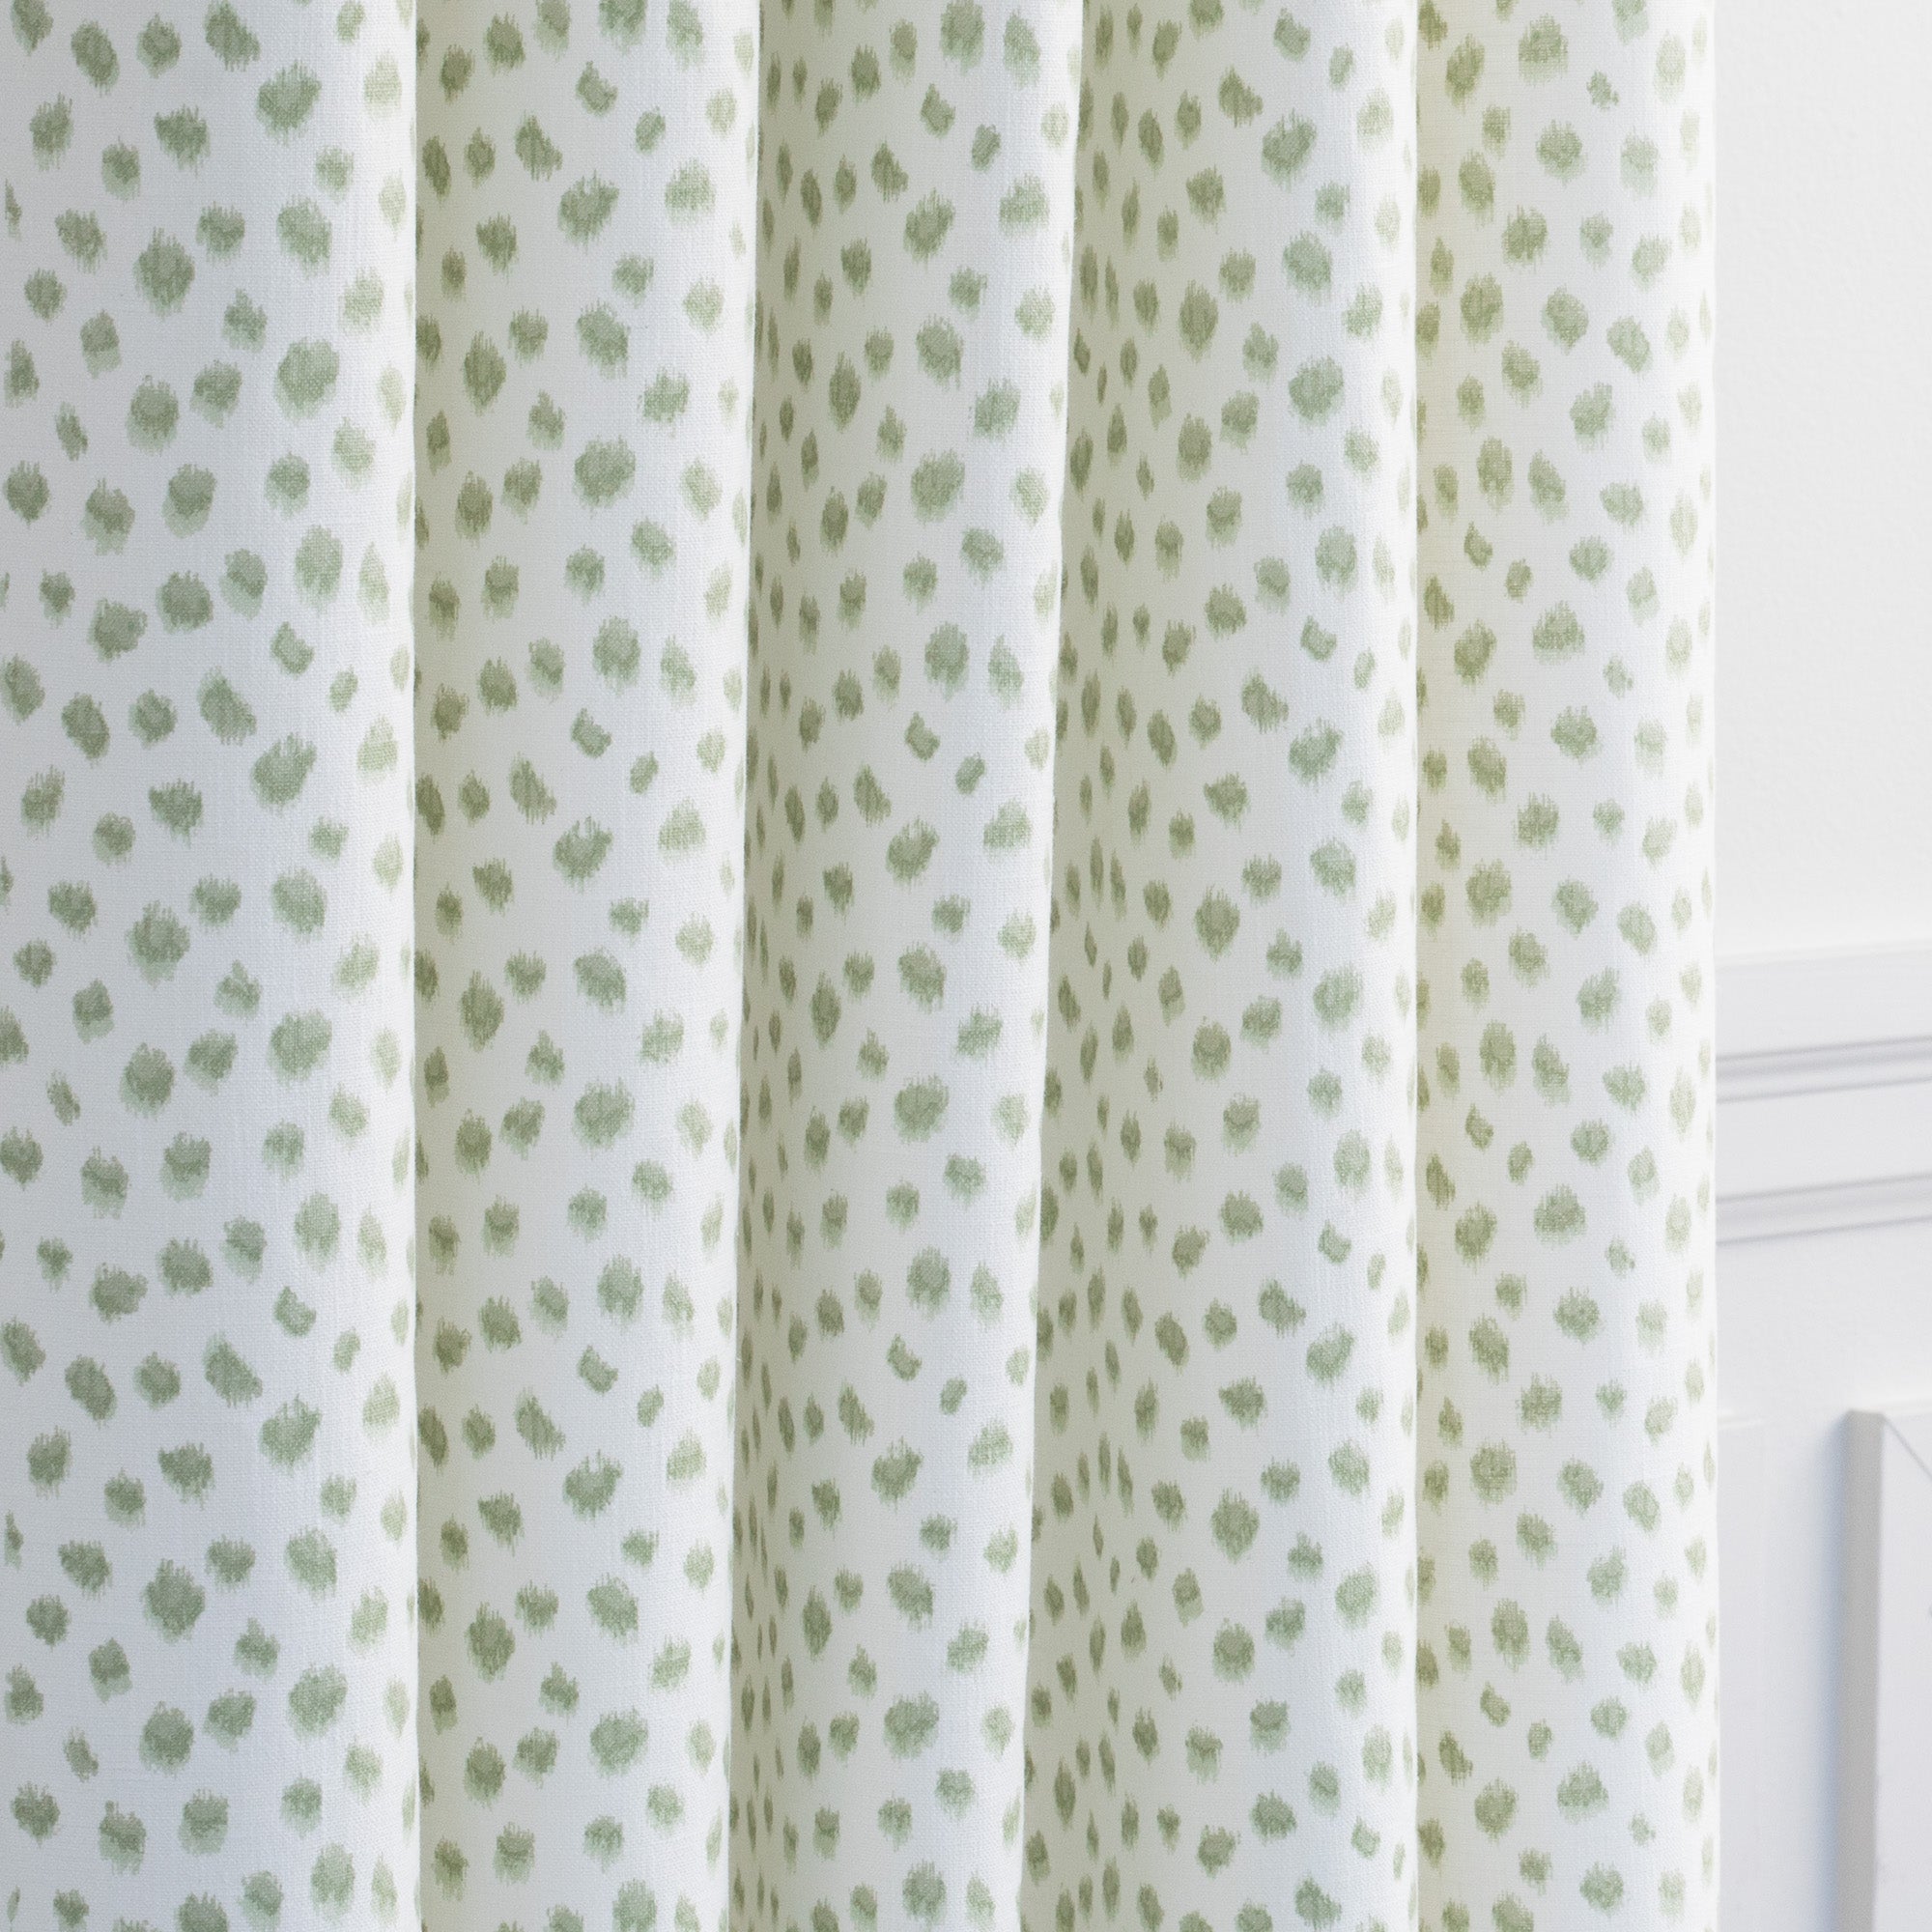 a white and green inky dot print drapery fabric